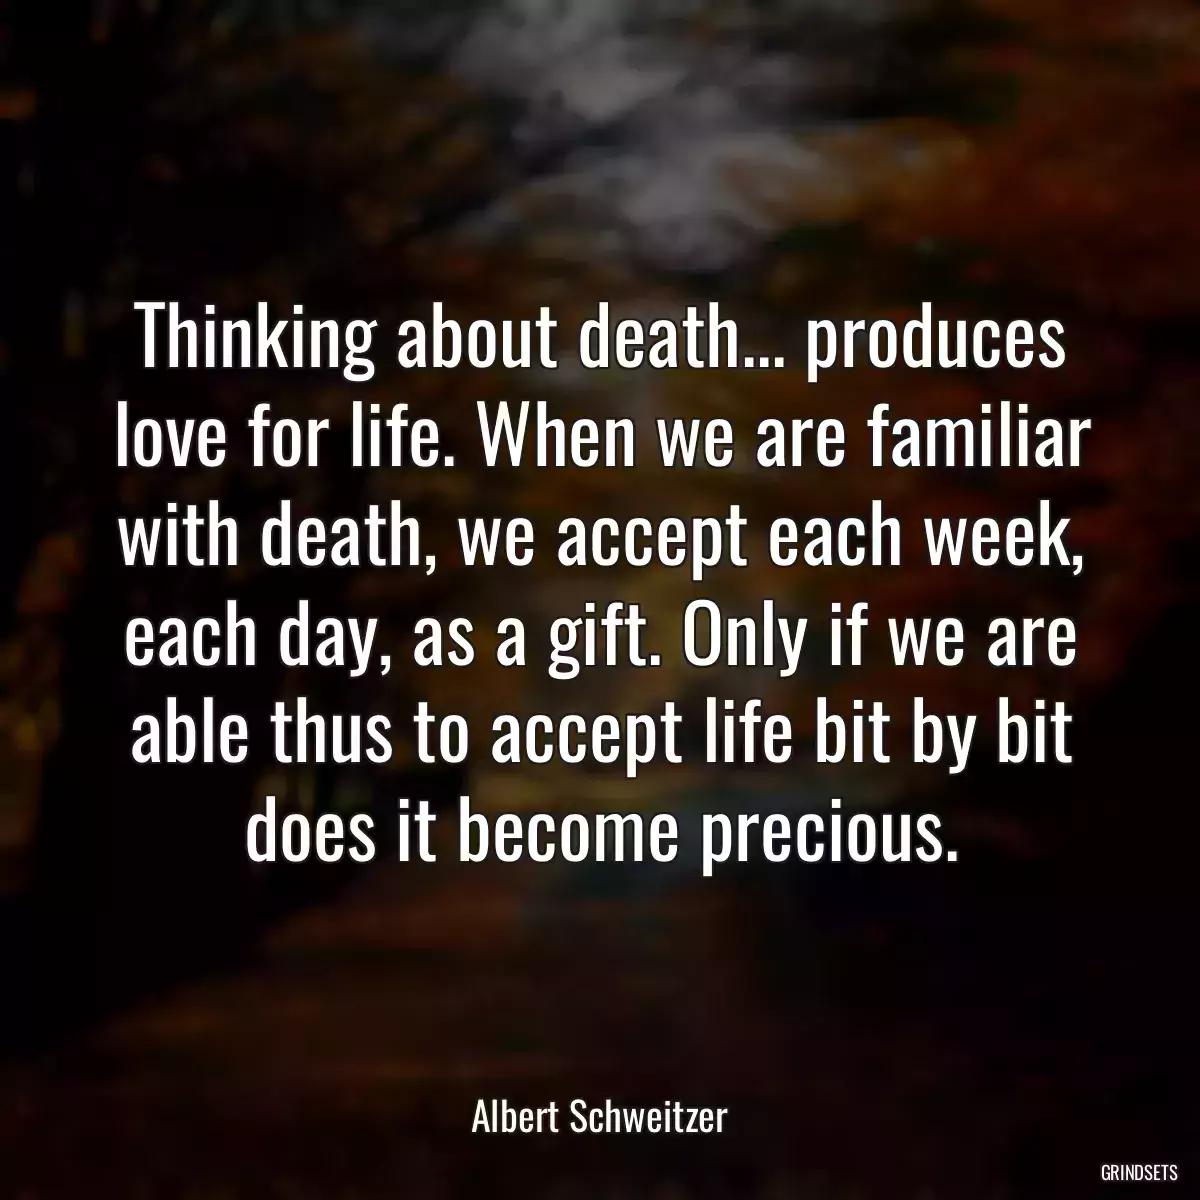 Thinking about death... produces love for life. When we are familiar with death, we accept each week, each day, as a gift. Only if we are able thus to accept life bit by bit does it become precious.